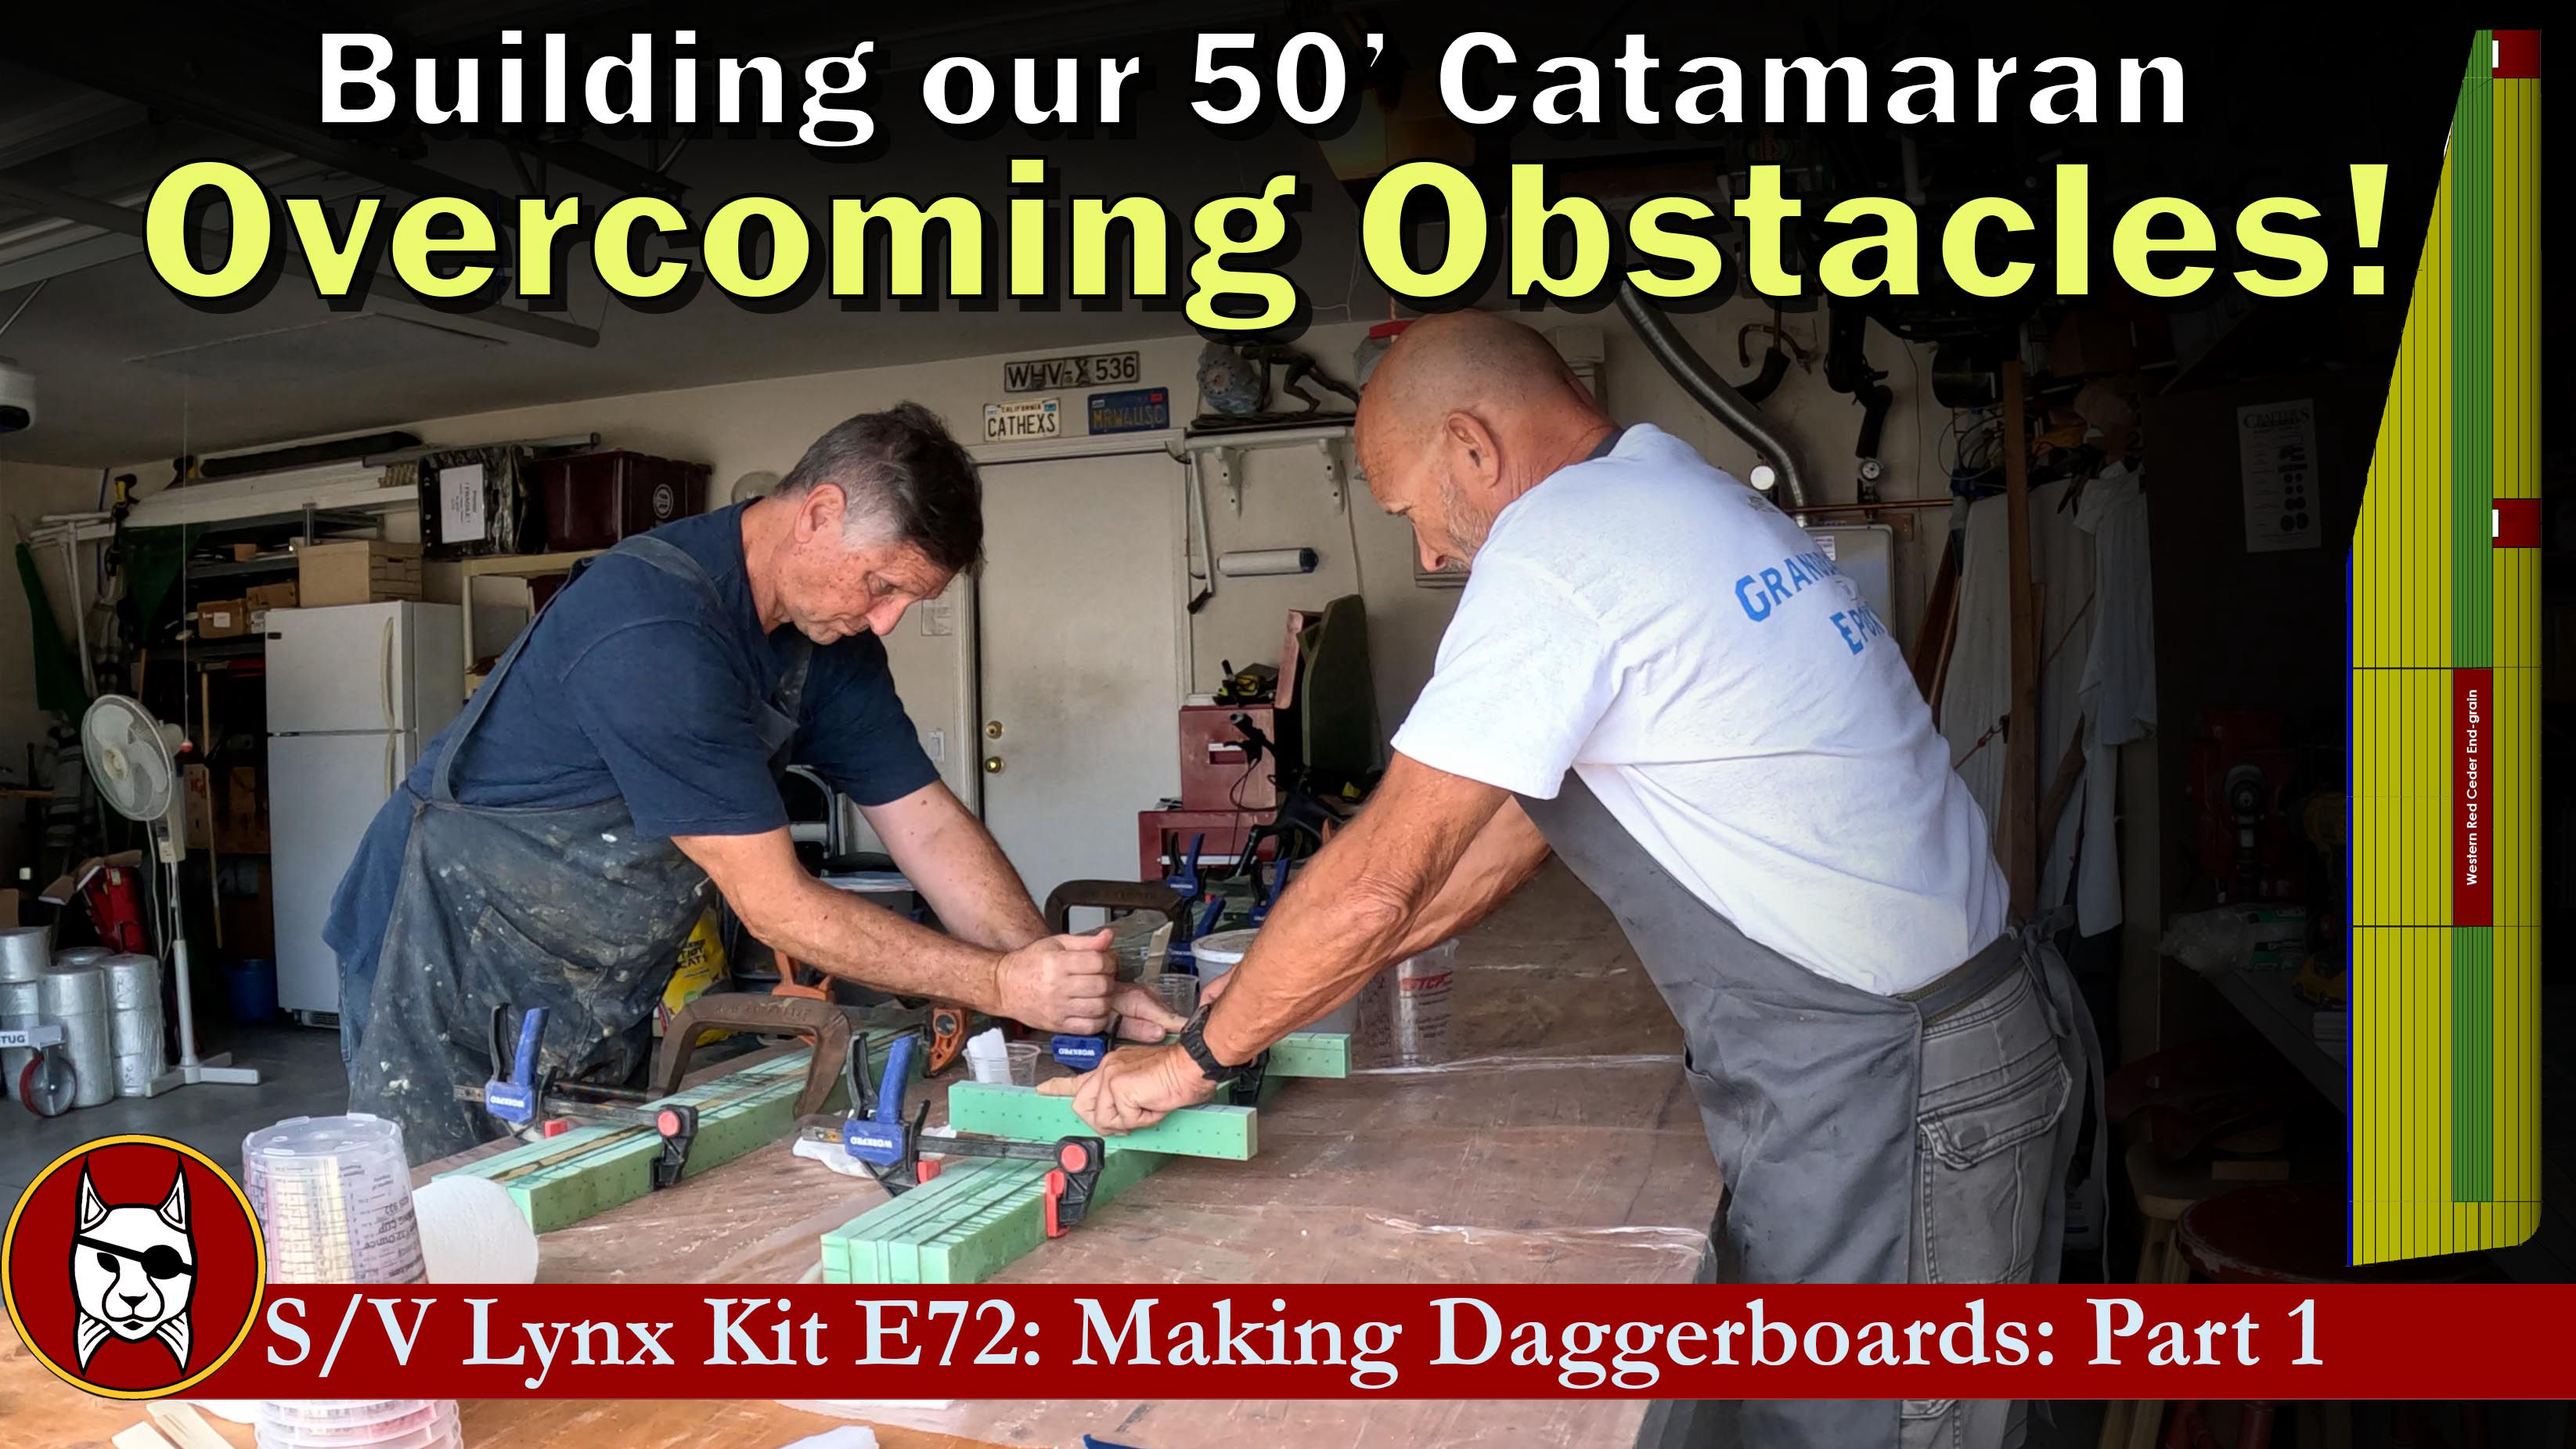 Making our Daggerboards: Part 1